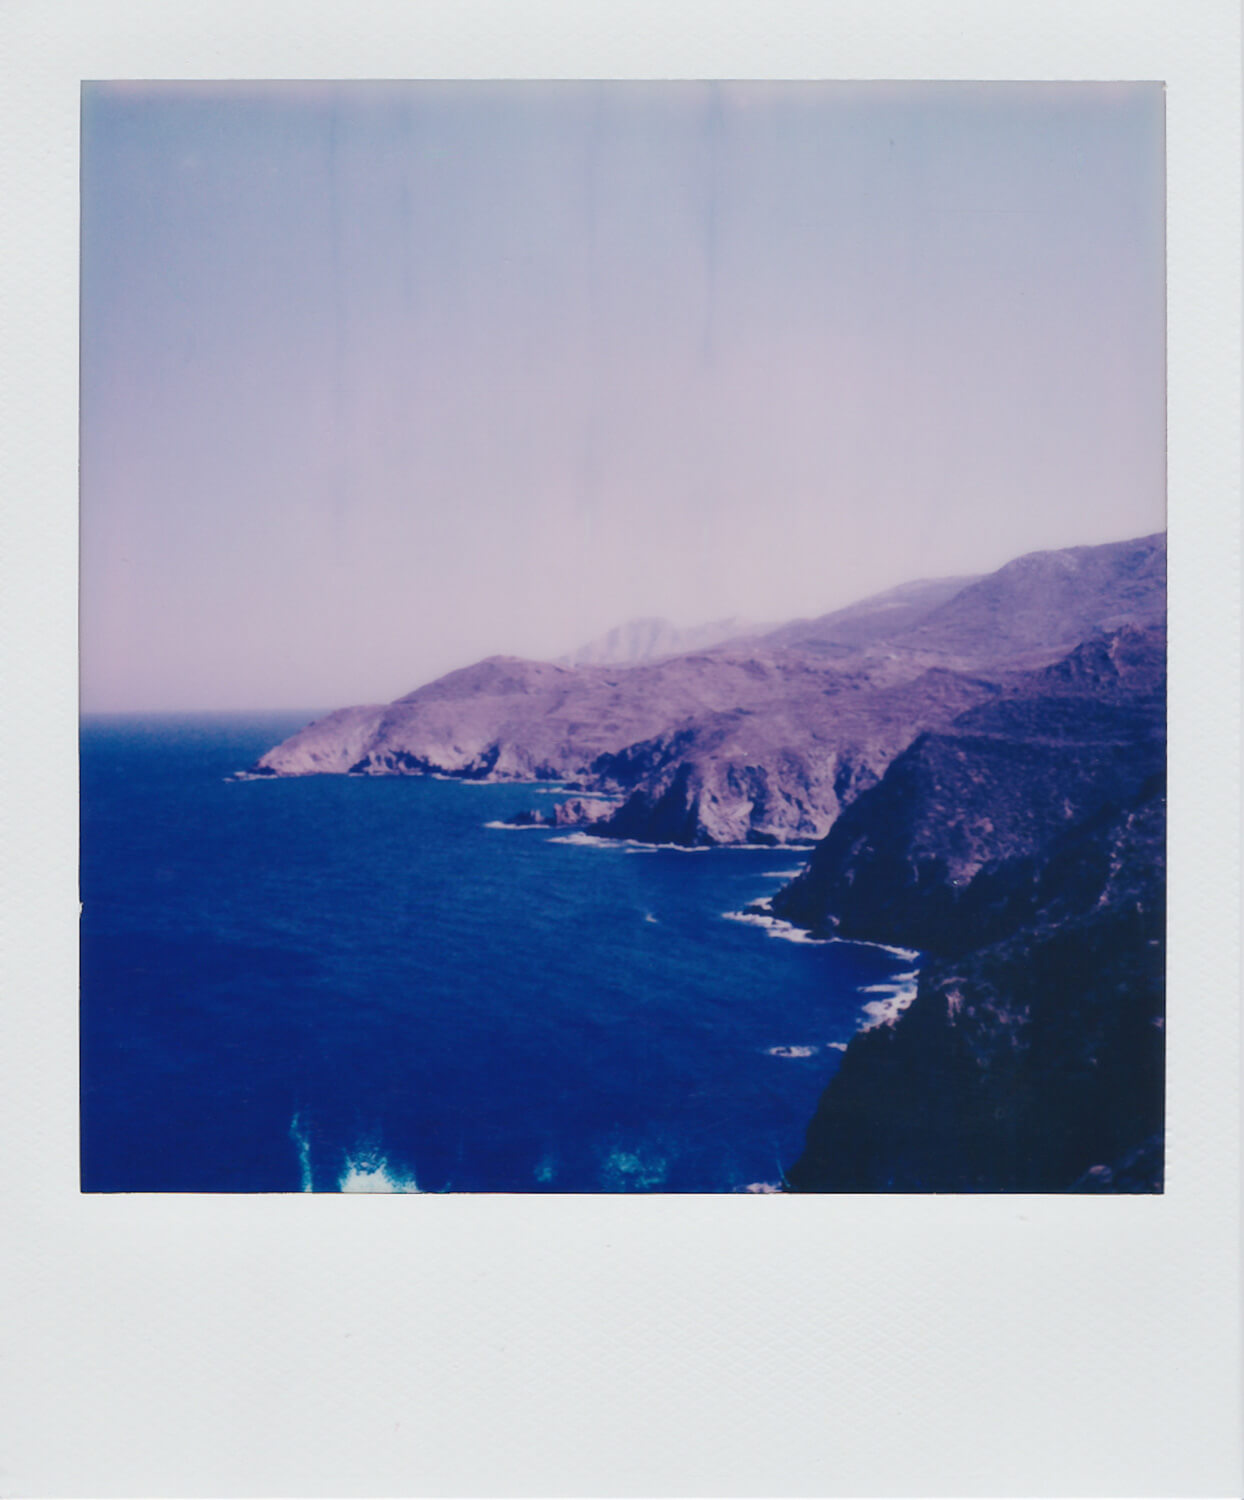 5 Frames... Of Polaroid Color SX-70 Film at the tiny Greek island of Anafi (ISO 160 / Polaroid SX-70 + 116mm f/8 lens) - by George Pavlopoulos